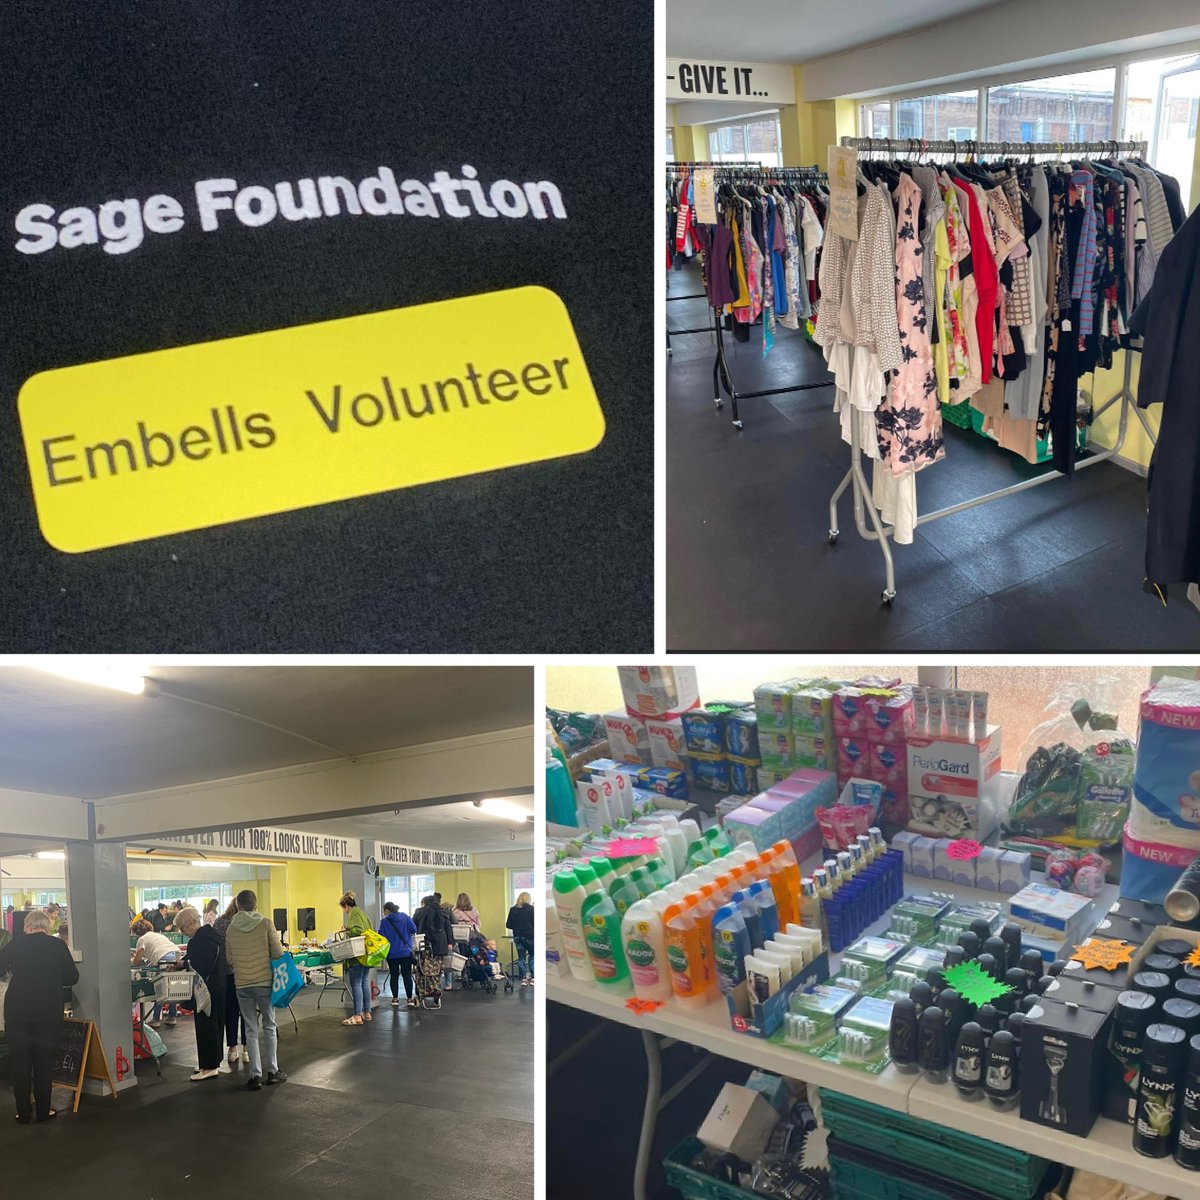 Just spent one of my @sagefoundation days volunteering with 
@Embellscic They are doing an amazing job in creating a better everyday life for people and families in need. Through their range of food, support, and wellbeing services, #CommunitySupport #Volunteering